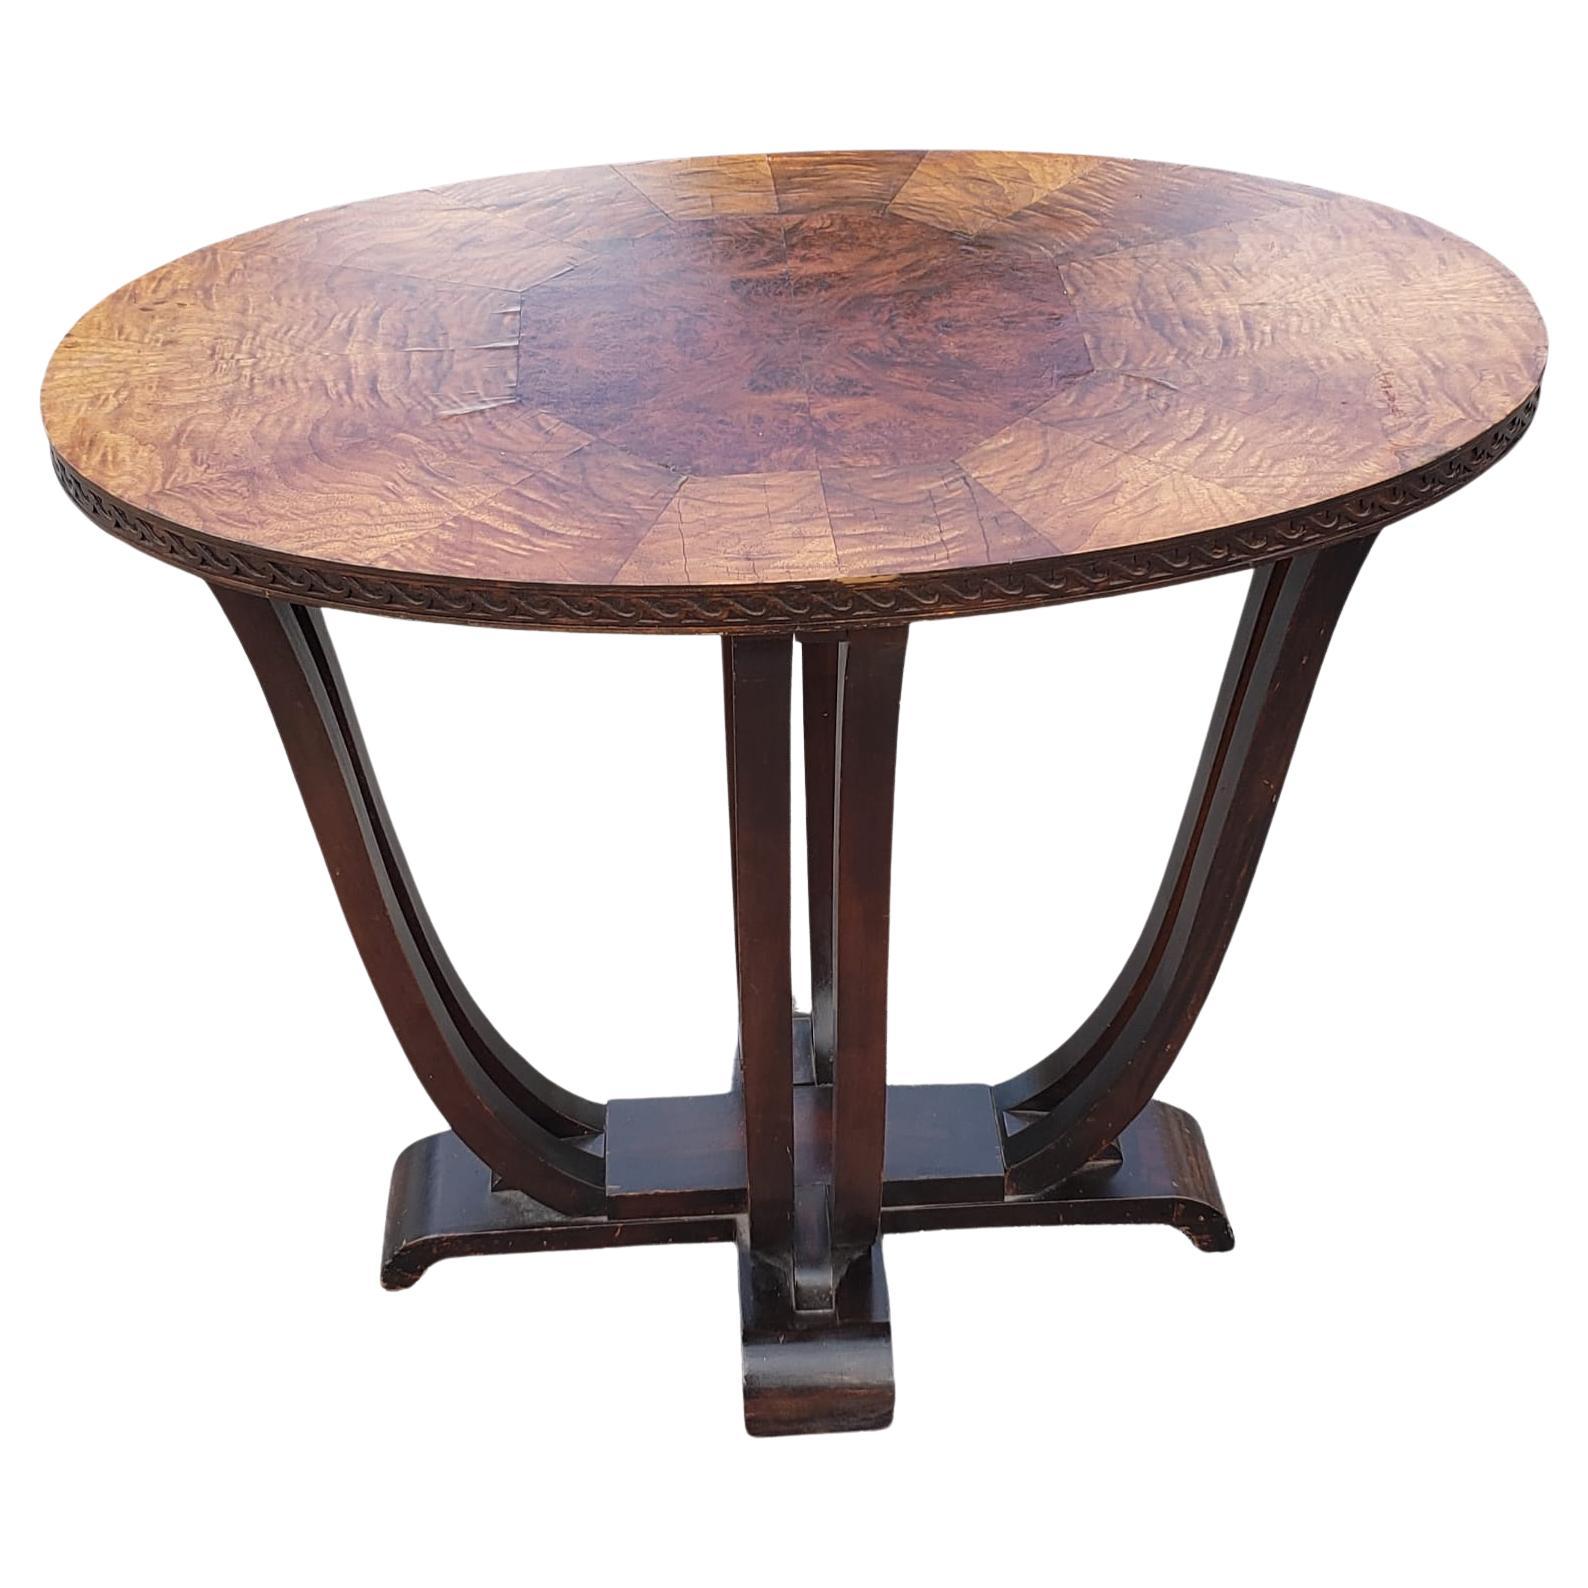 Early 20th Century Burl Walnut Oval Center Table or Side Table For Sale